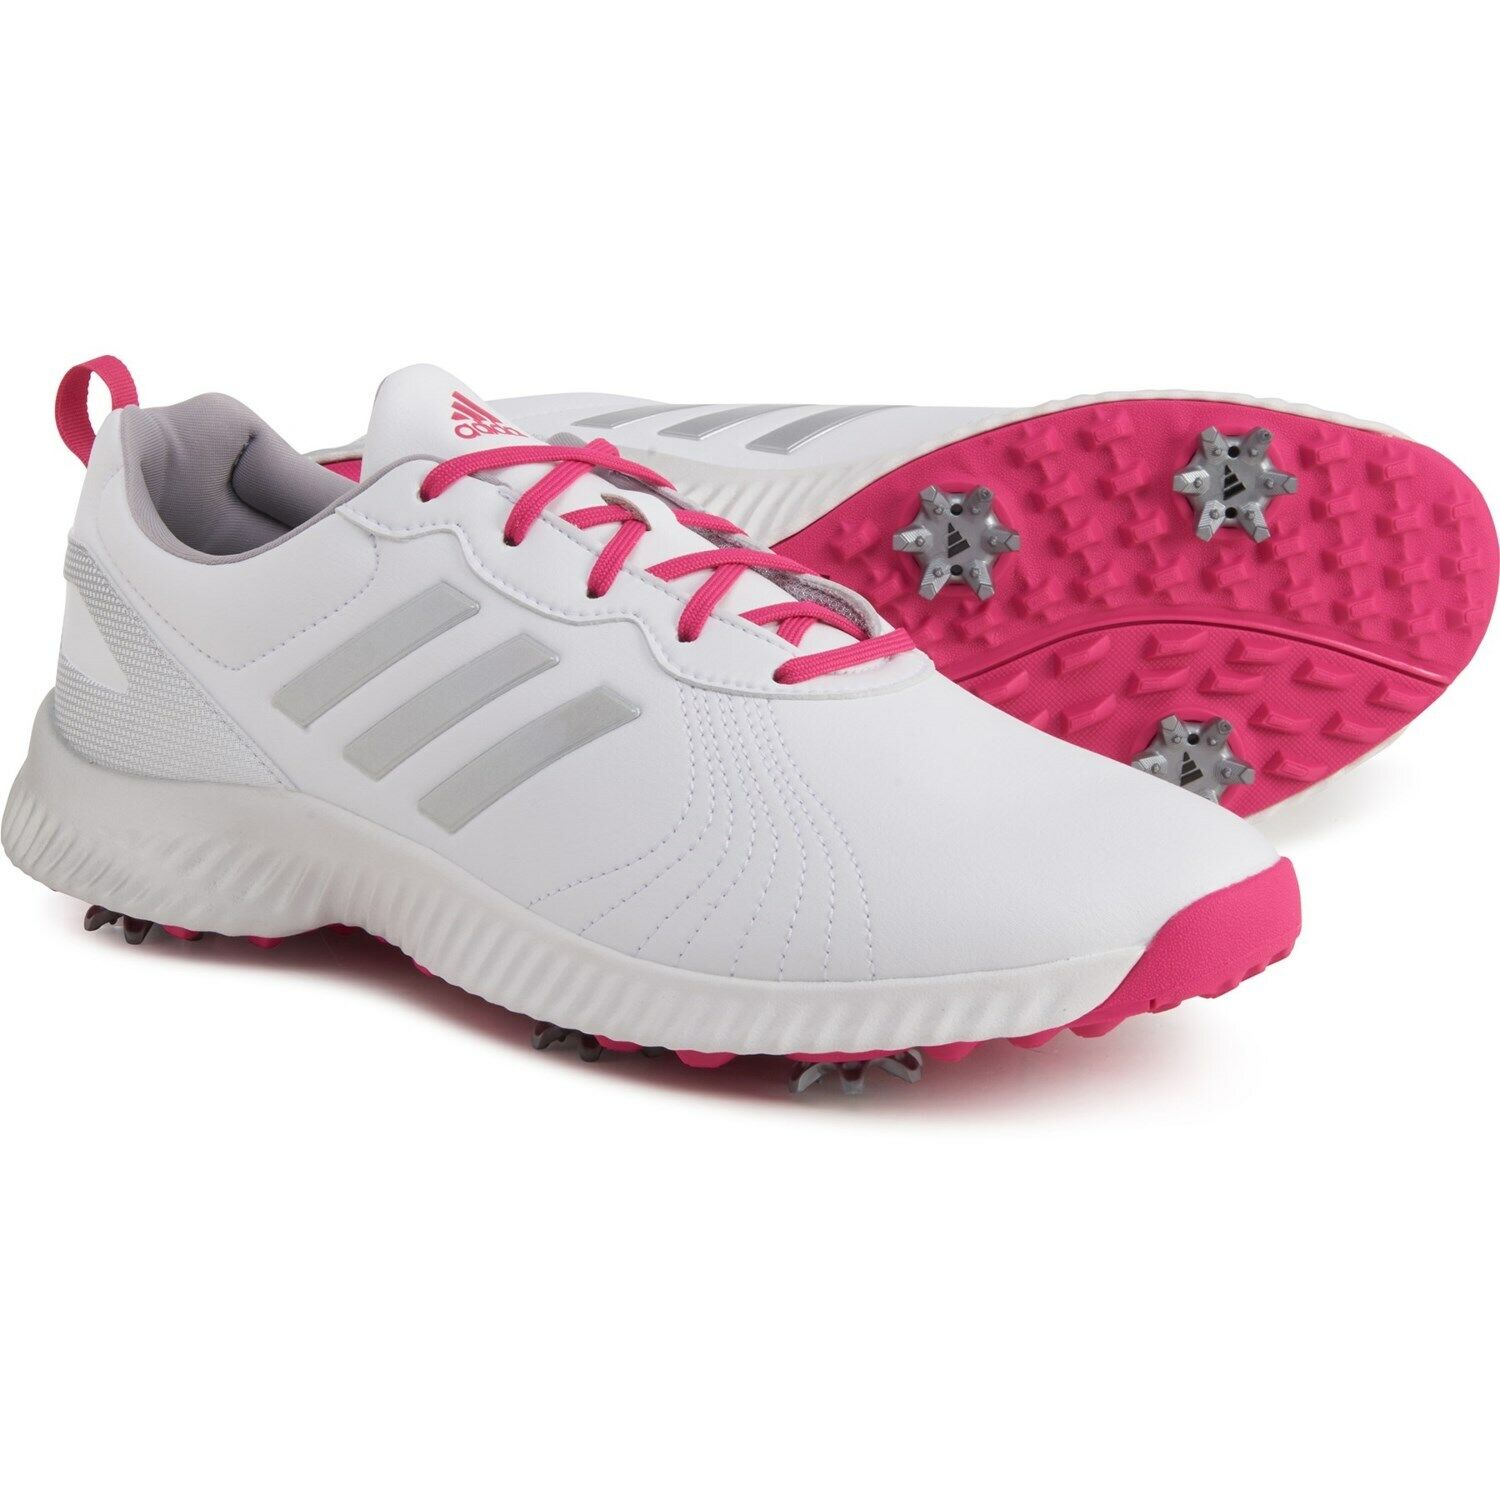 ADIDAS Response BOUNCE Waterproof Cushioned GOLF SHOES Womens ...